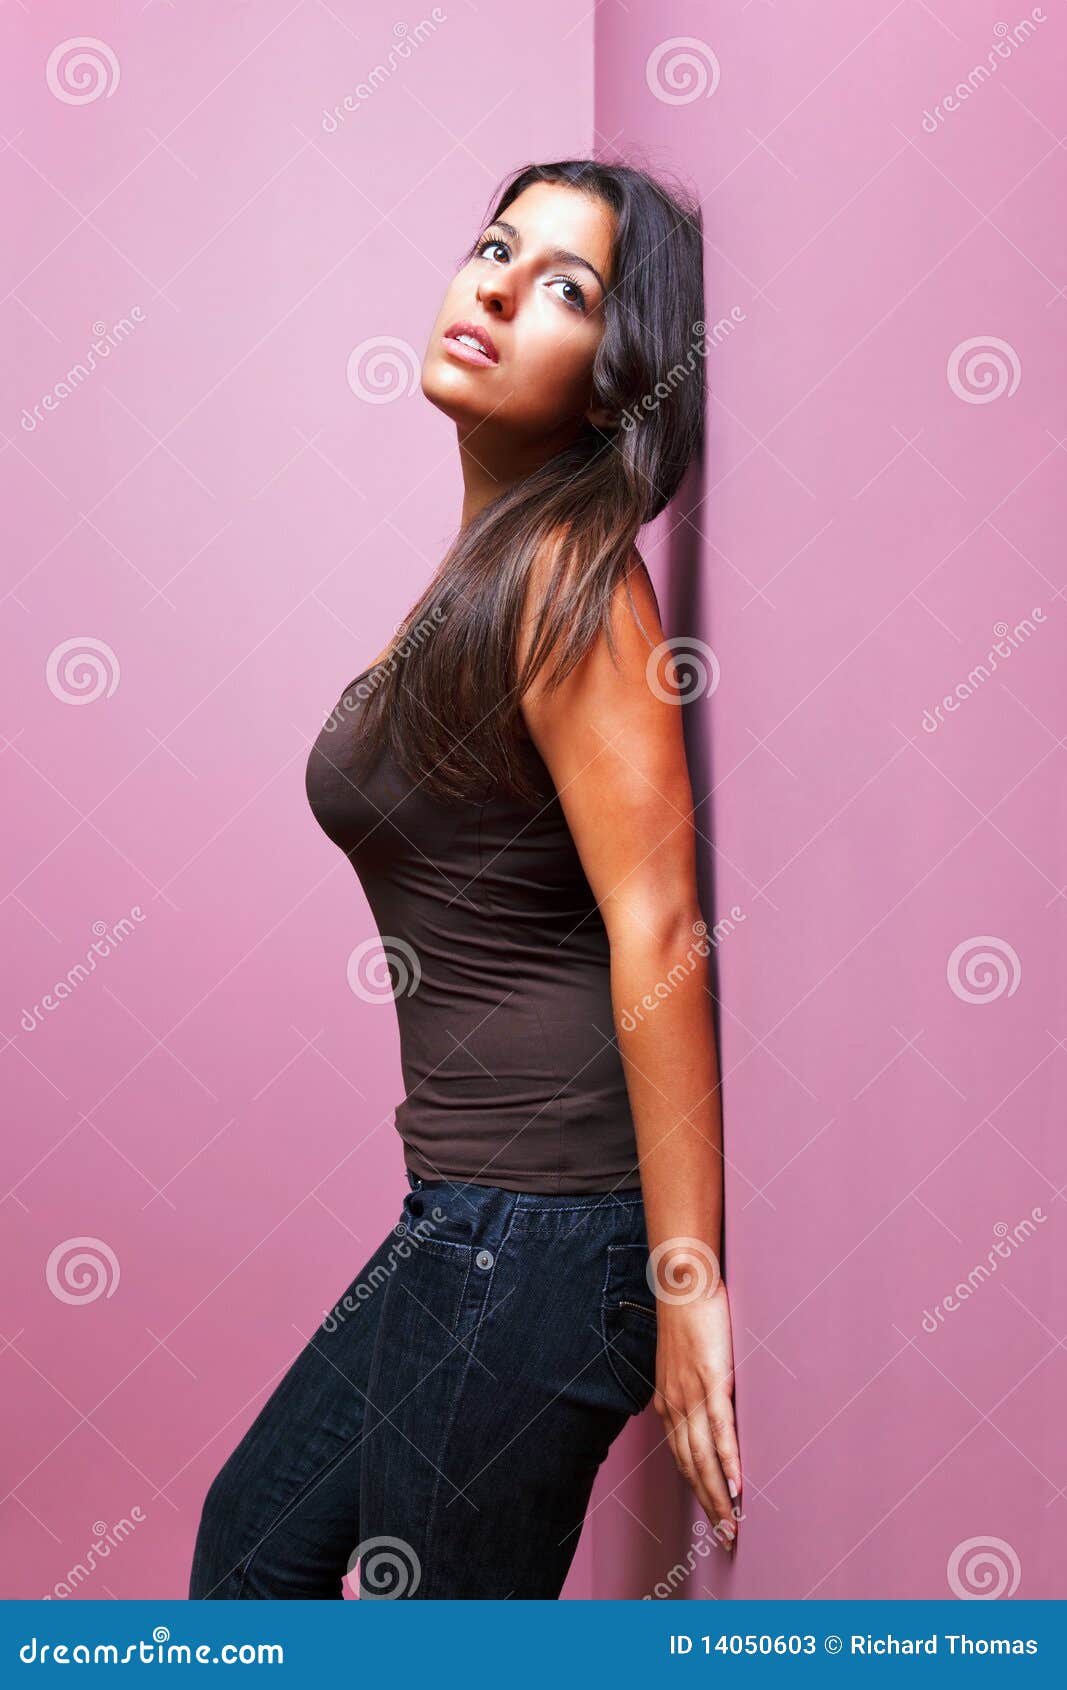 Woman Leaning Against A Wall Stock Image Image Of Female Girl